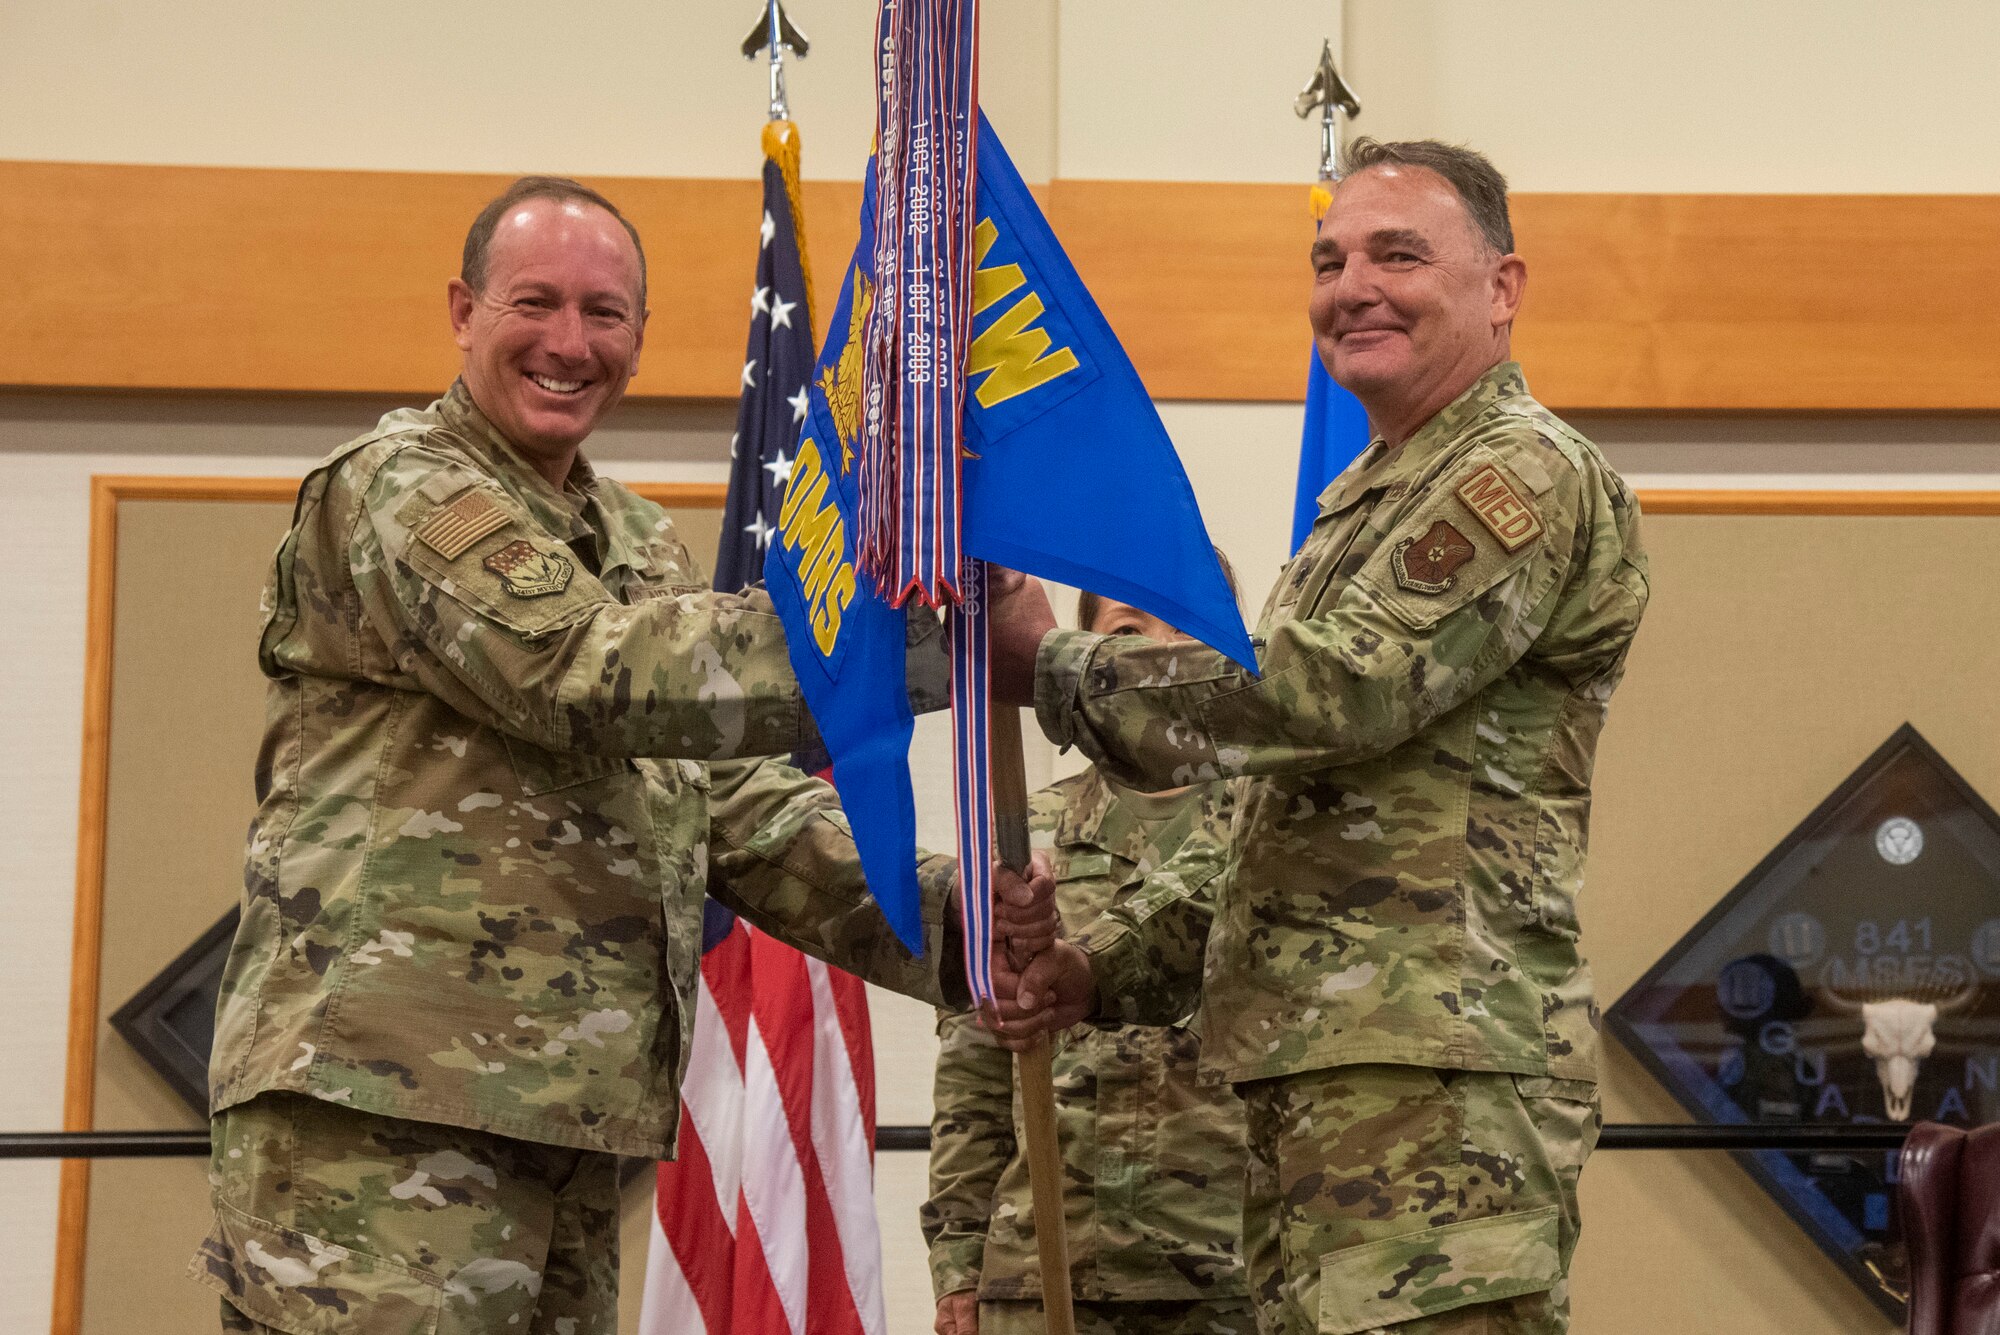 Lt. Col. Darren Damiani, 341st OMRS incoming commander, right, assumes command from Col. Mark Pomerinke, 341st Medical Group commander, during a change of command ceremony, June 16, 2021 at Malmstrom Air Force Base, Mont.